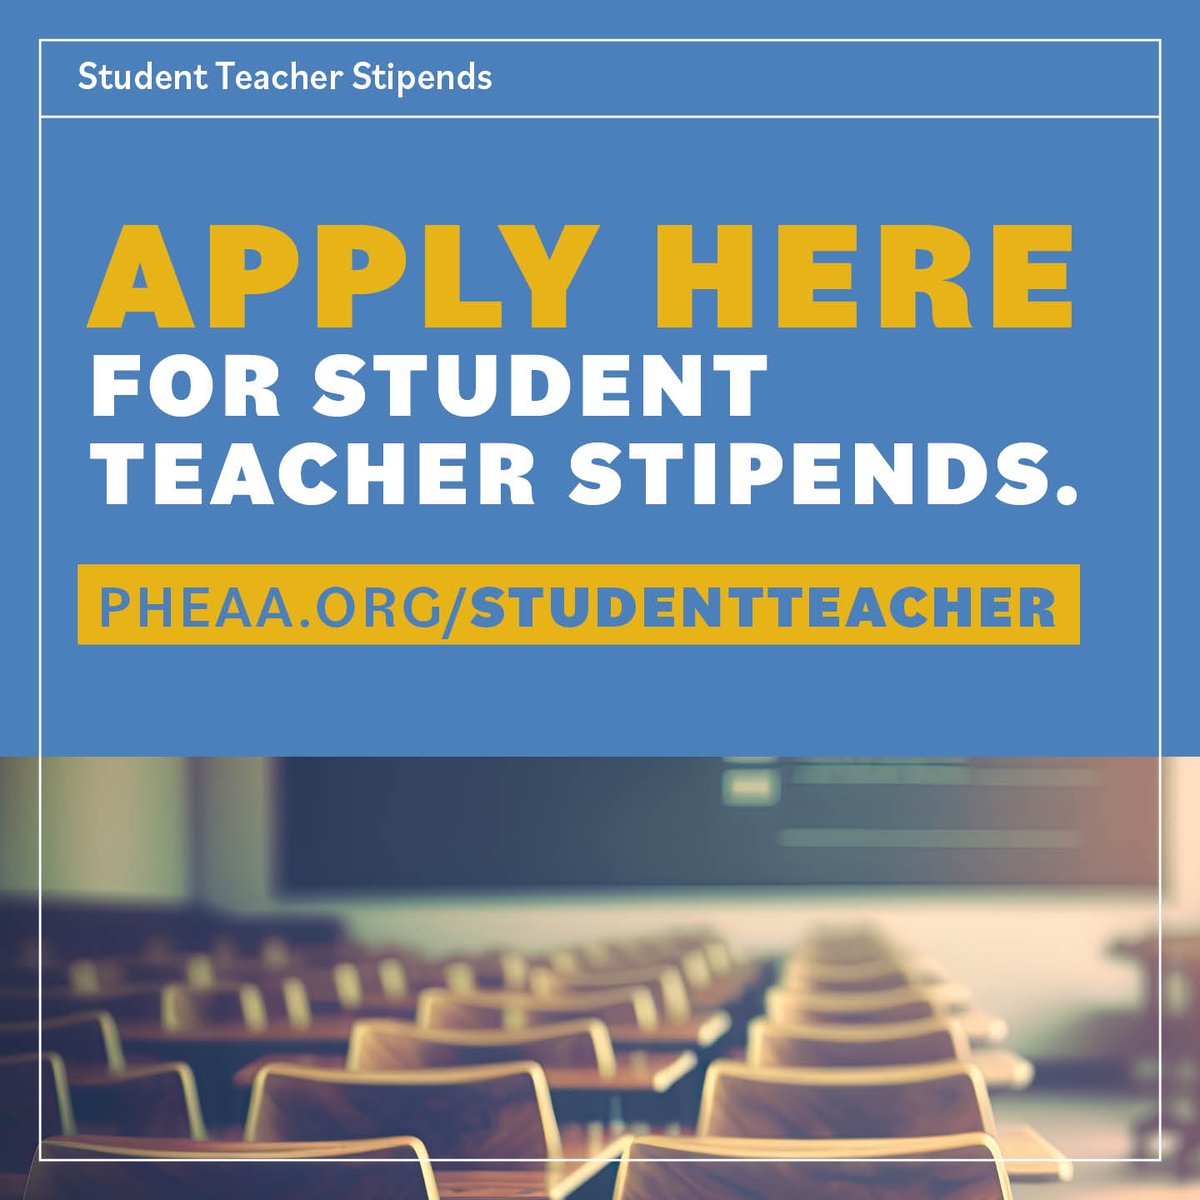 Spread the word! Student teacher stipend applications open TOMORROW at 9AM. Stipends for the 24-25 academic year will be awarded on a first come, first serve basis so student teachers are encouraged to apply as soon as possible! pheaa.org/funding-opport…